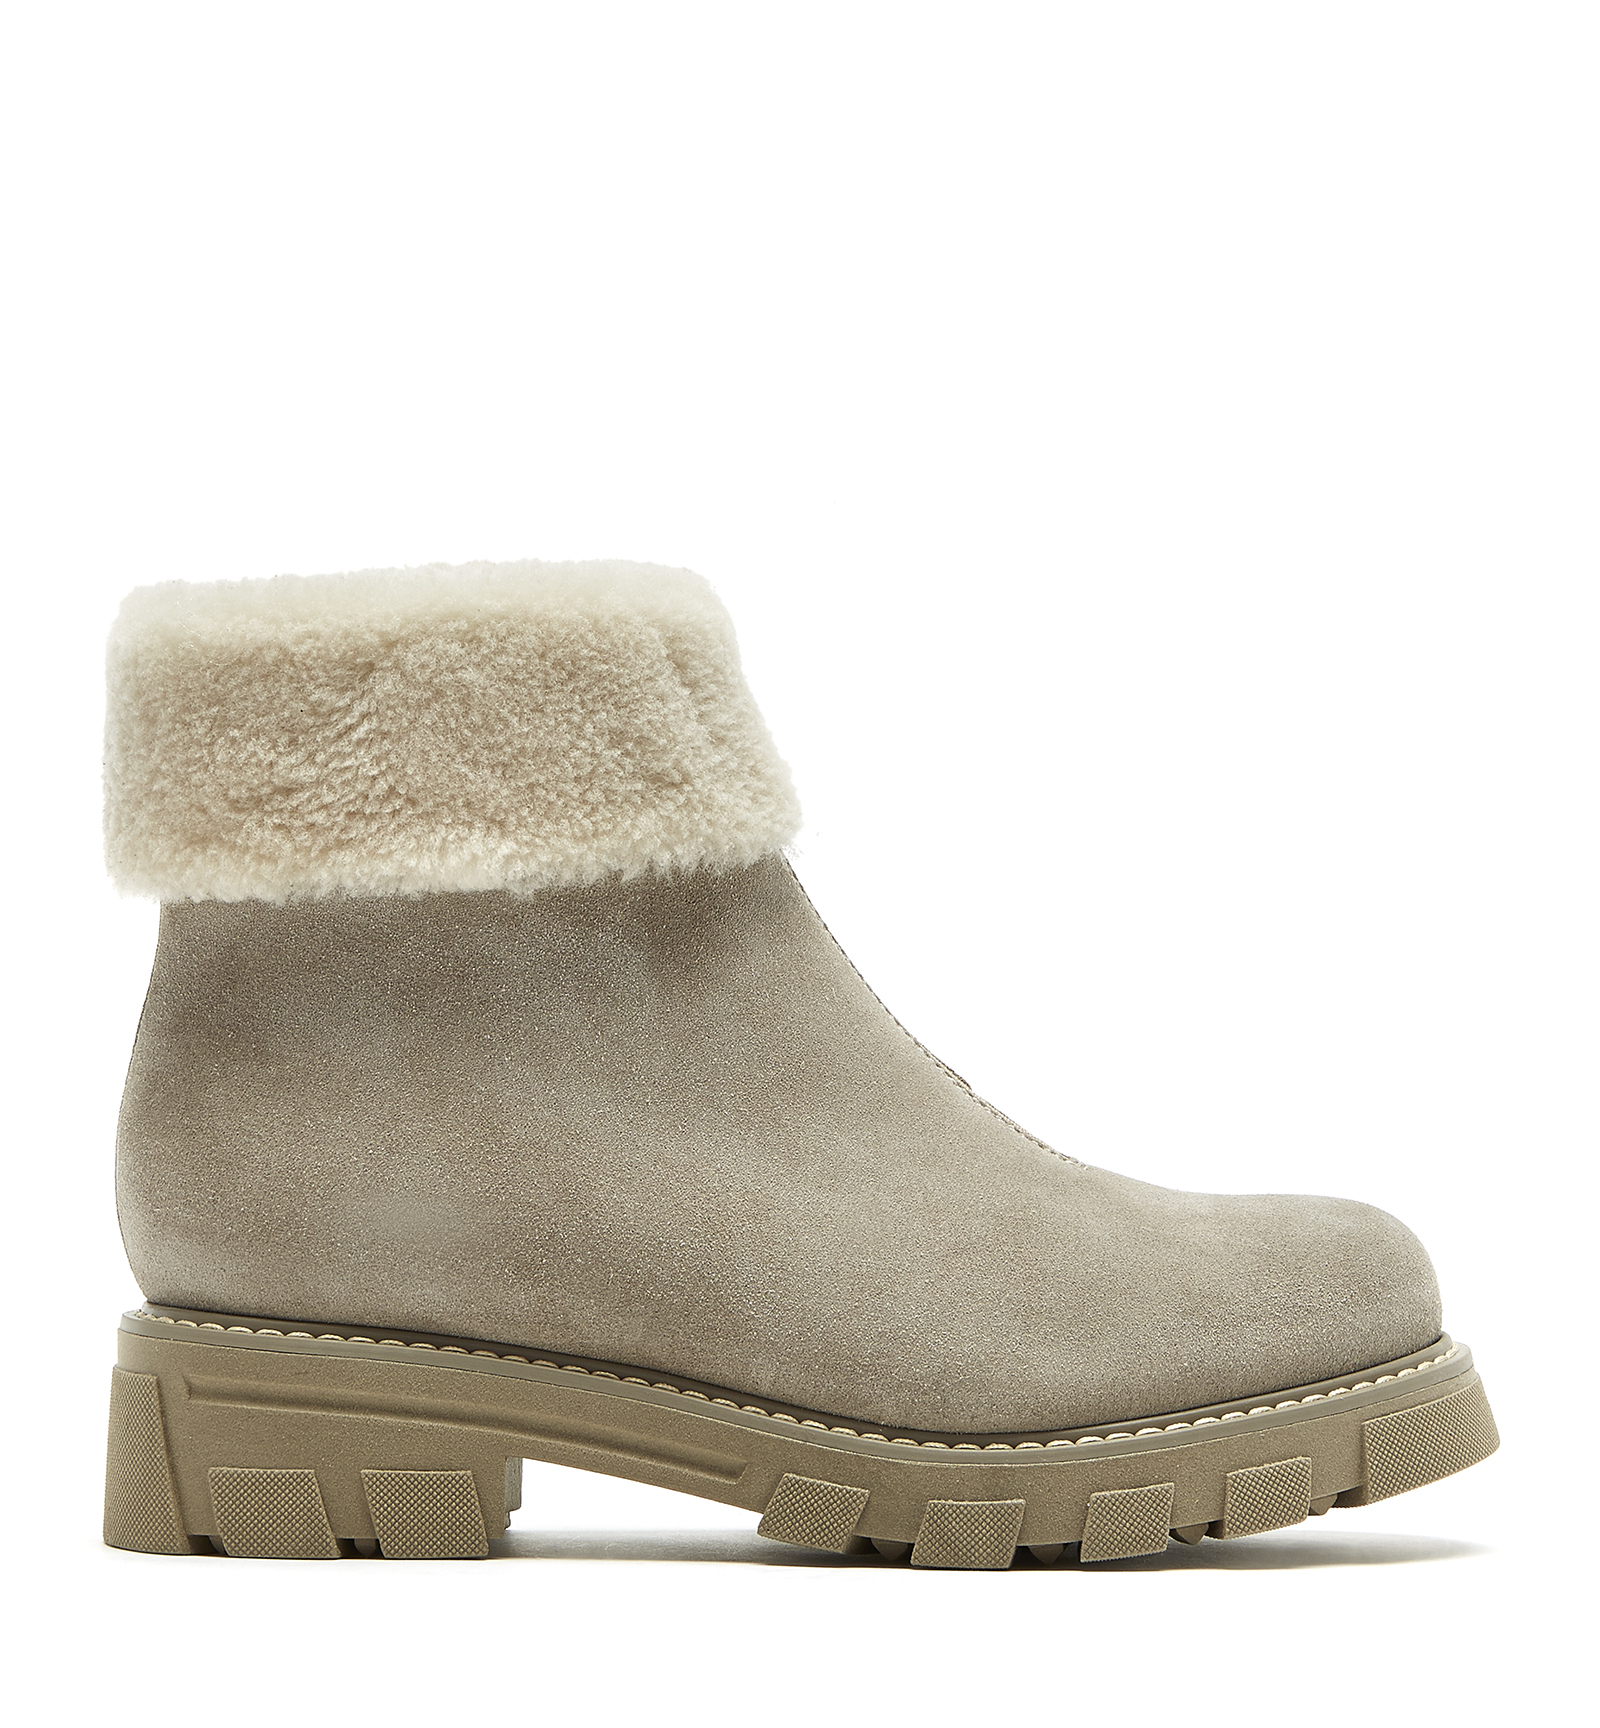 La Canadienne Abba Shearling Lined Suede Bootie In Pebble